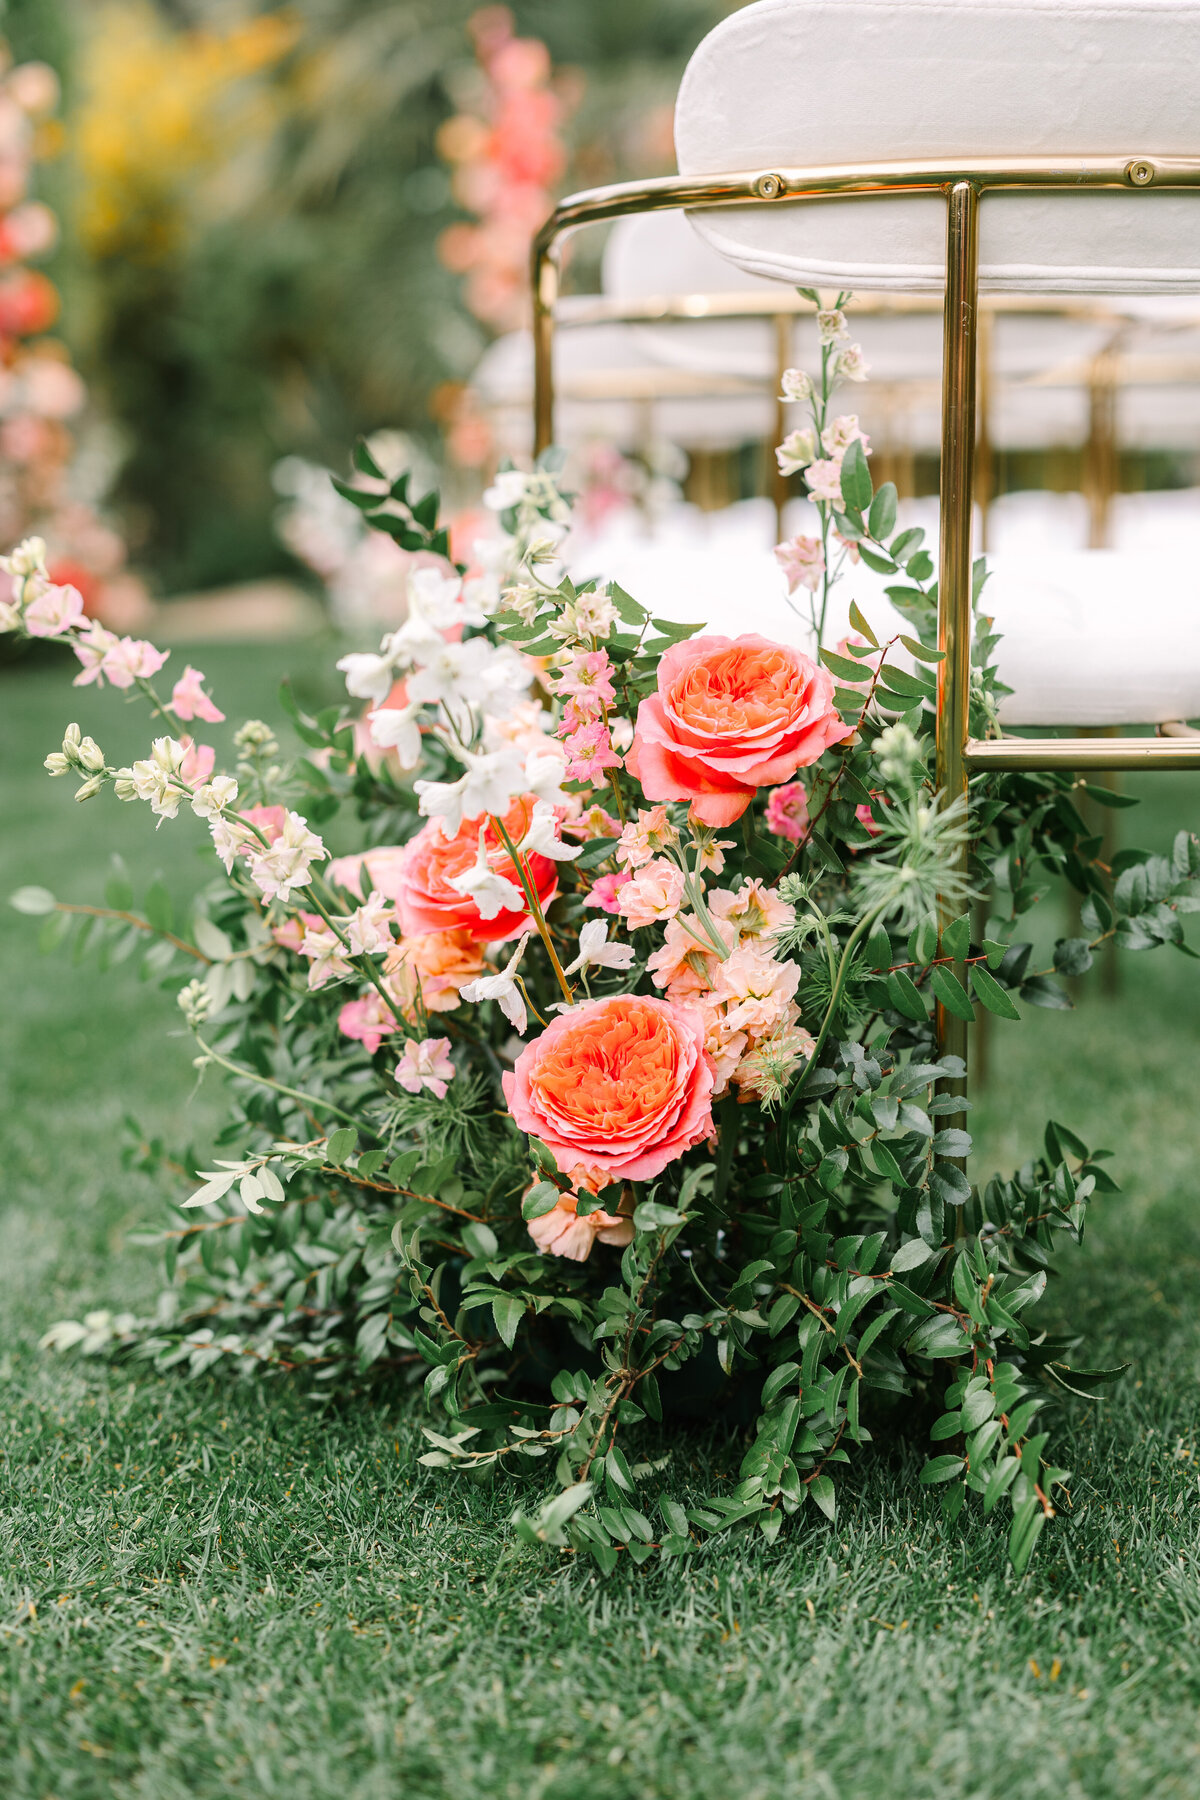 pink florals with lush greenery lining sonoma wedding ceremony chairs.